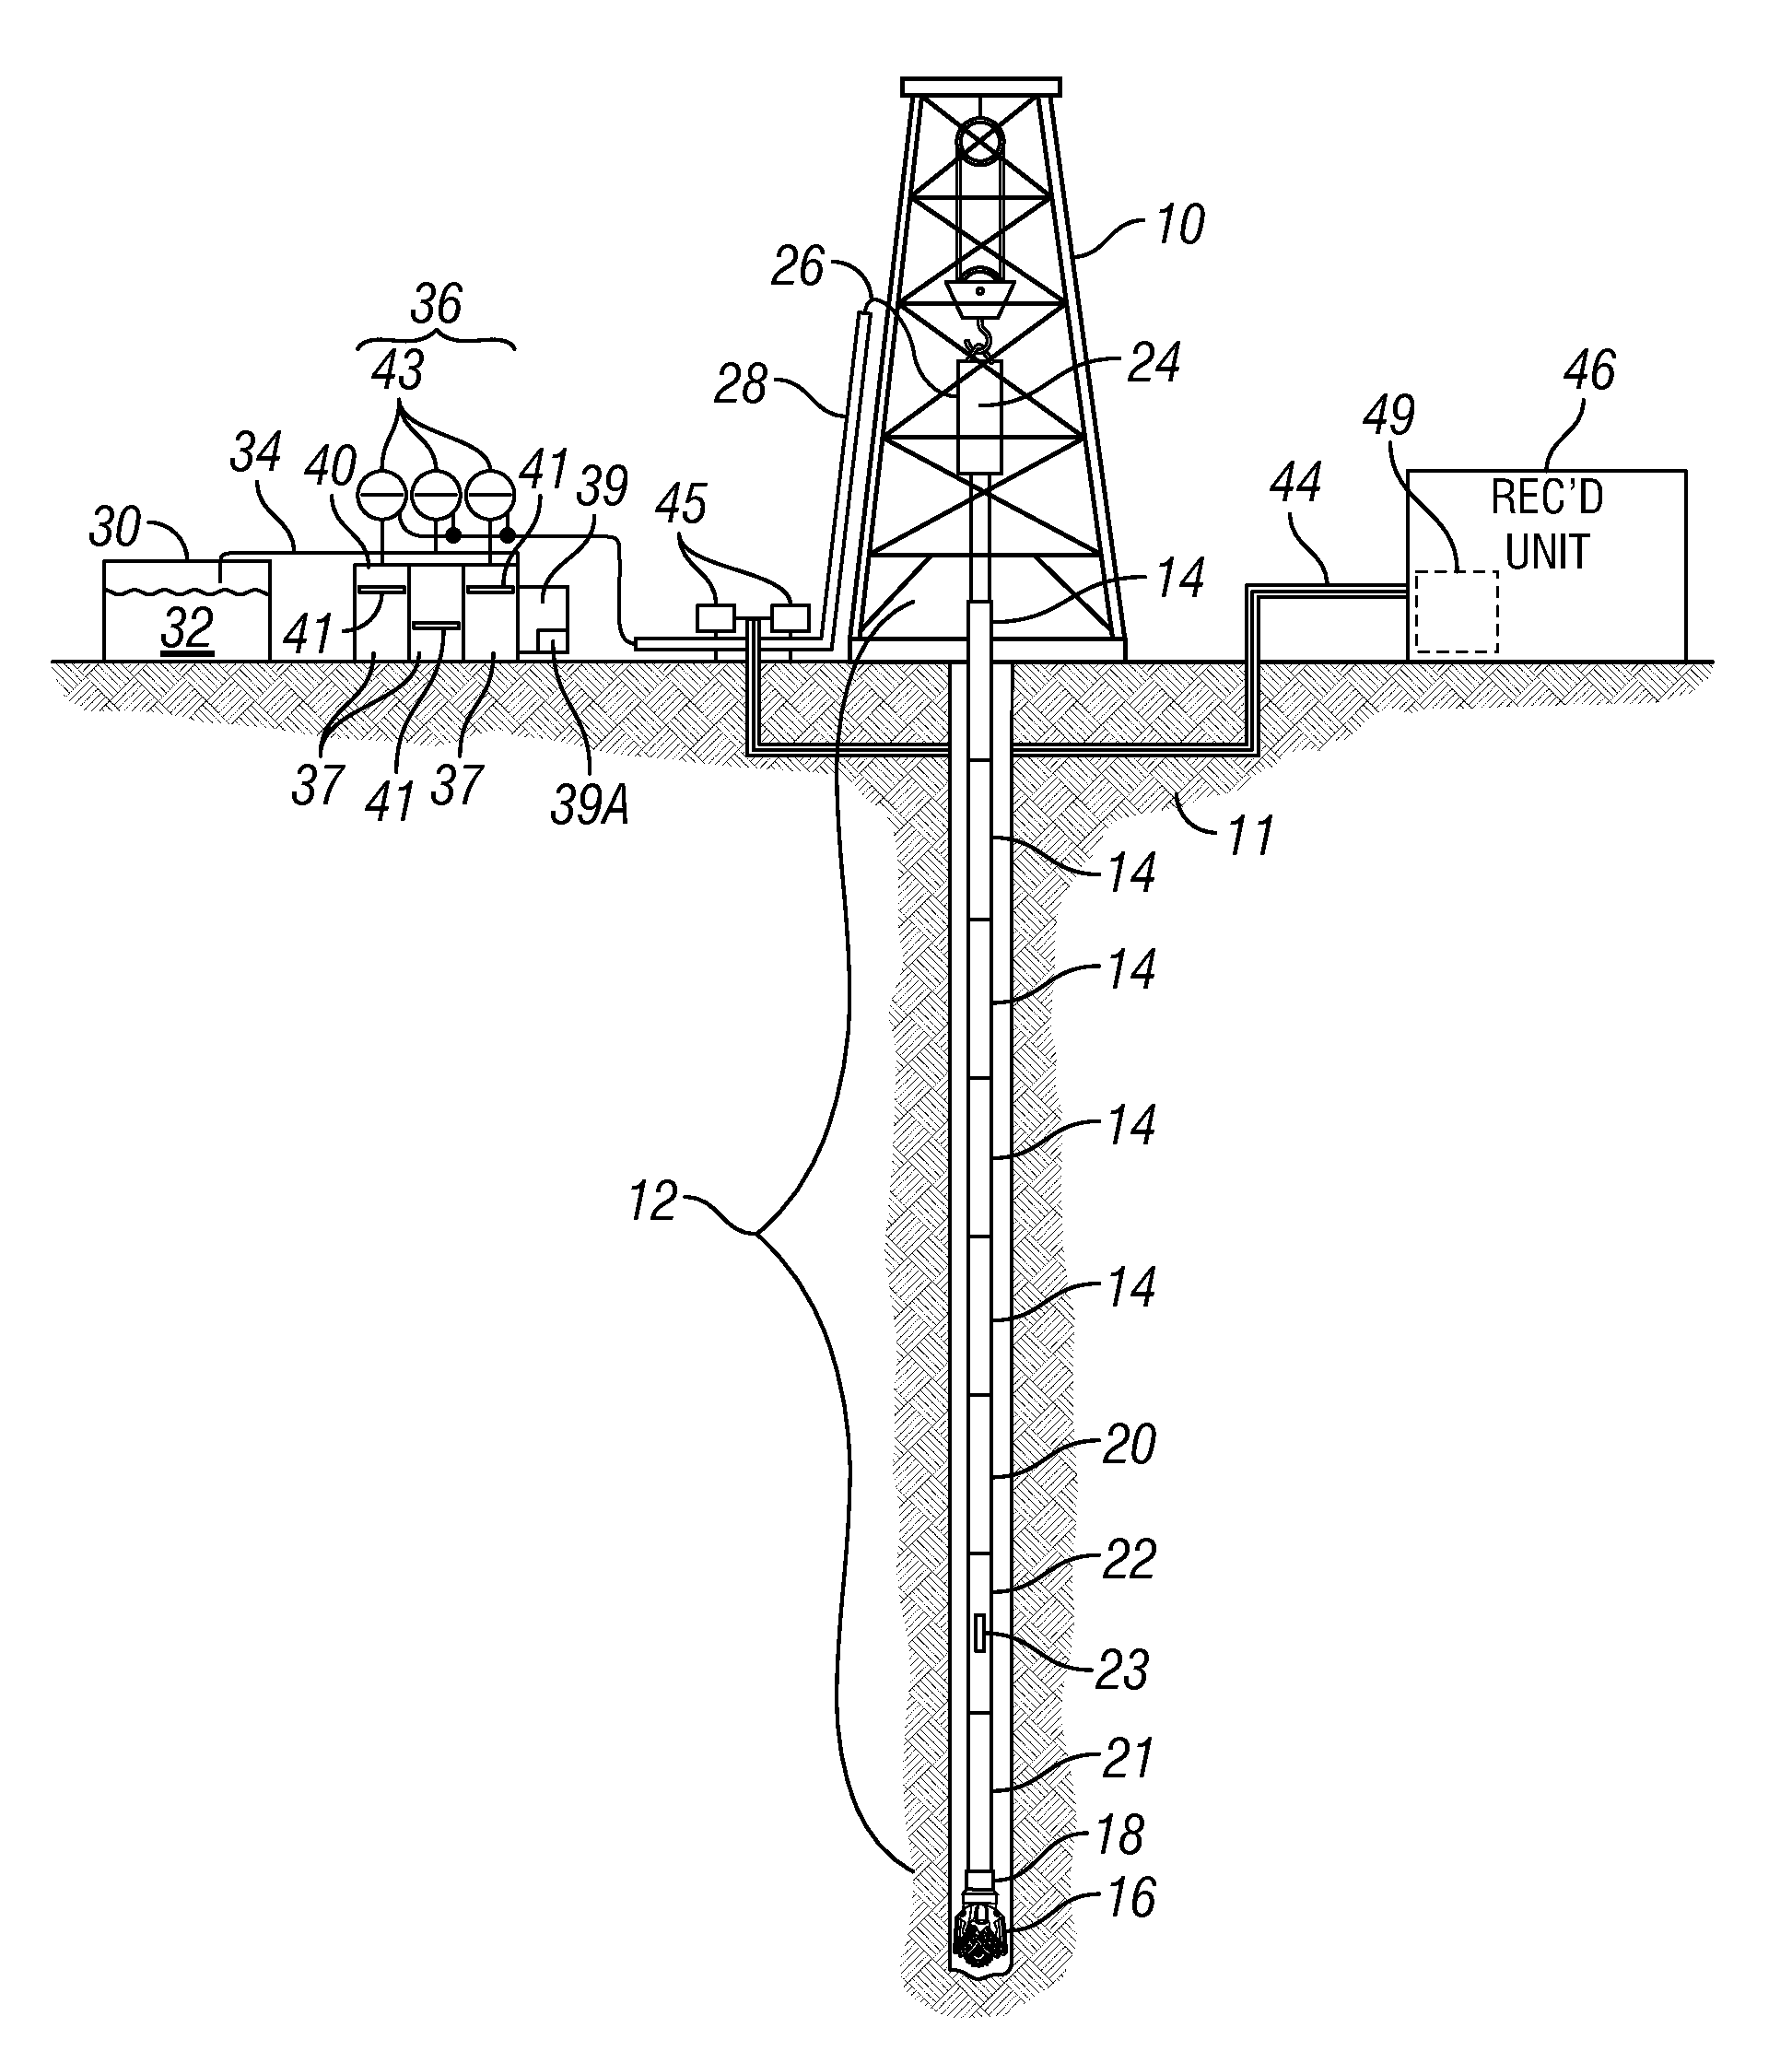 Wall contact caliper instruments for use in a drill string